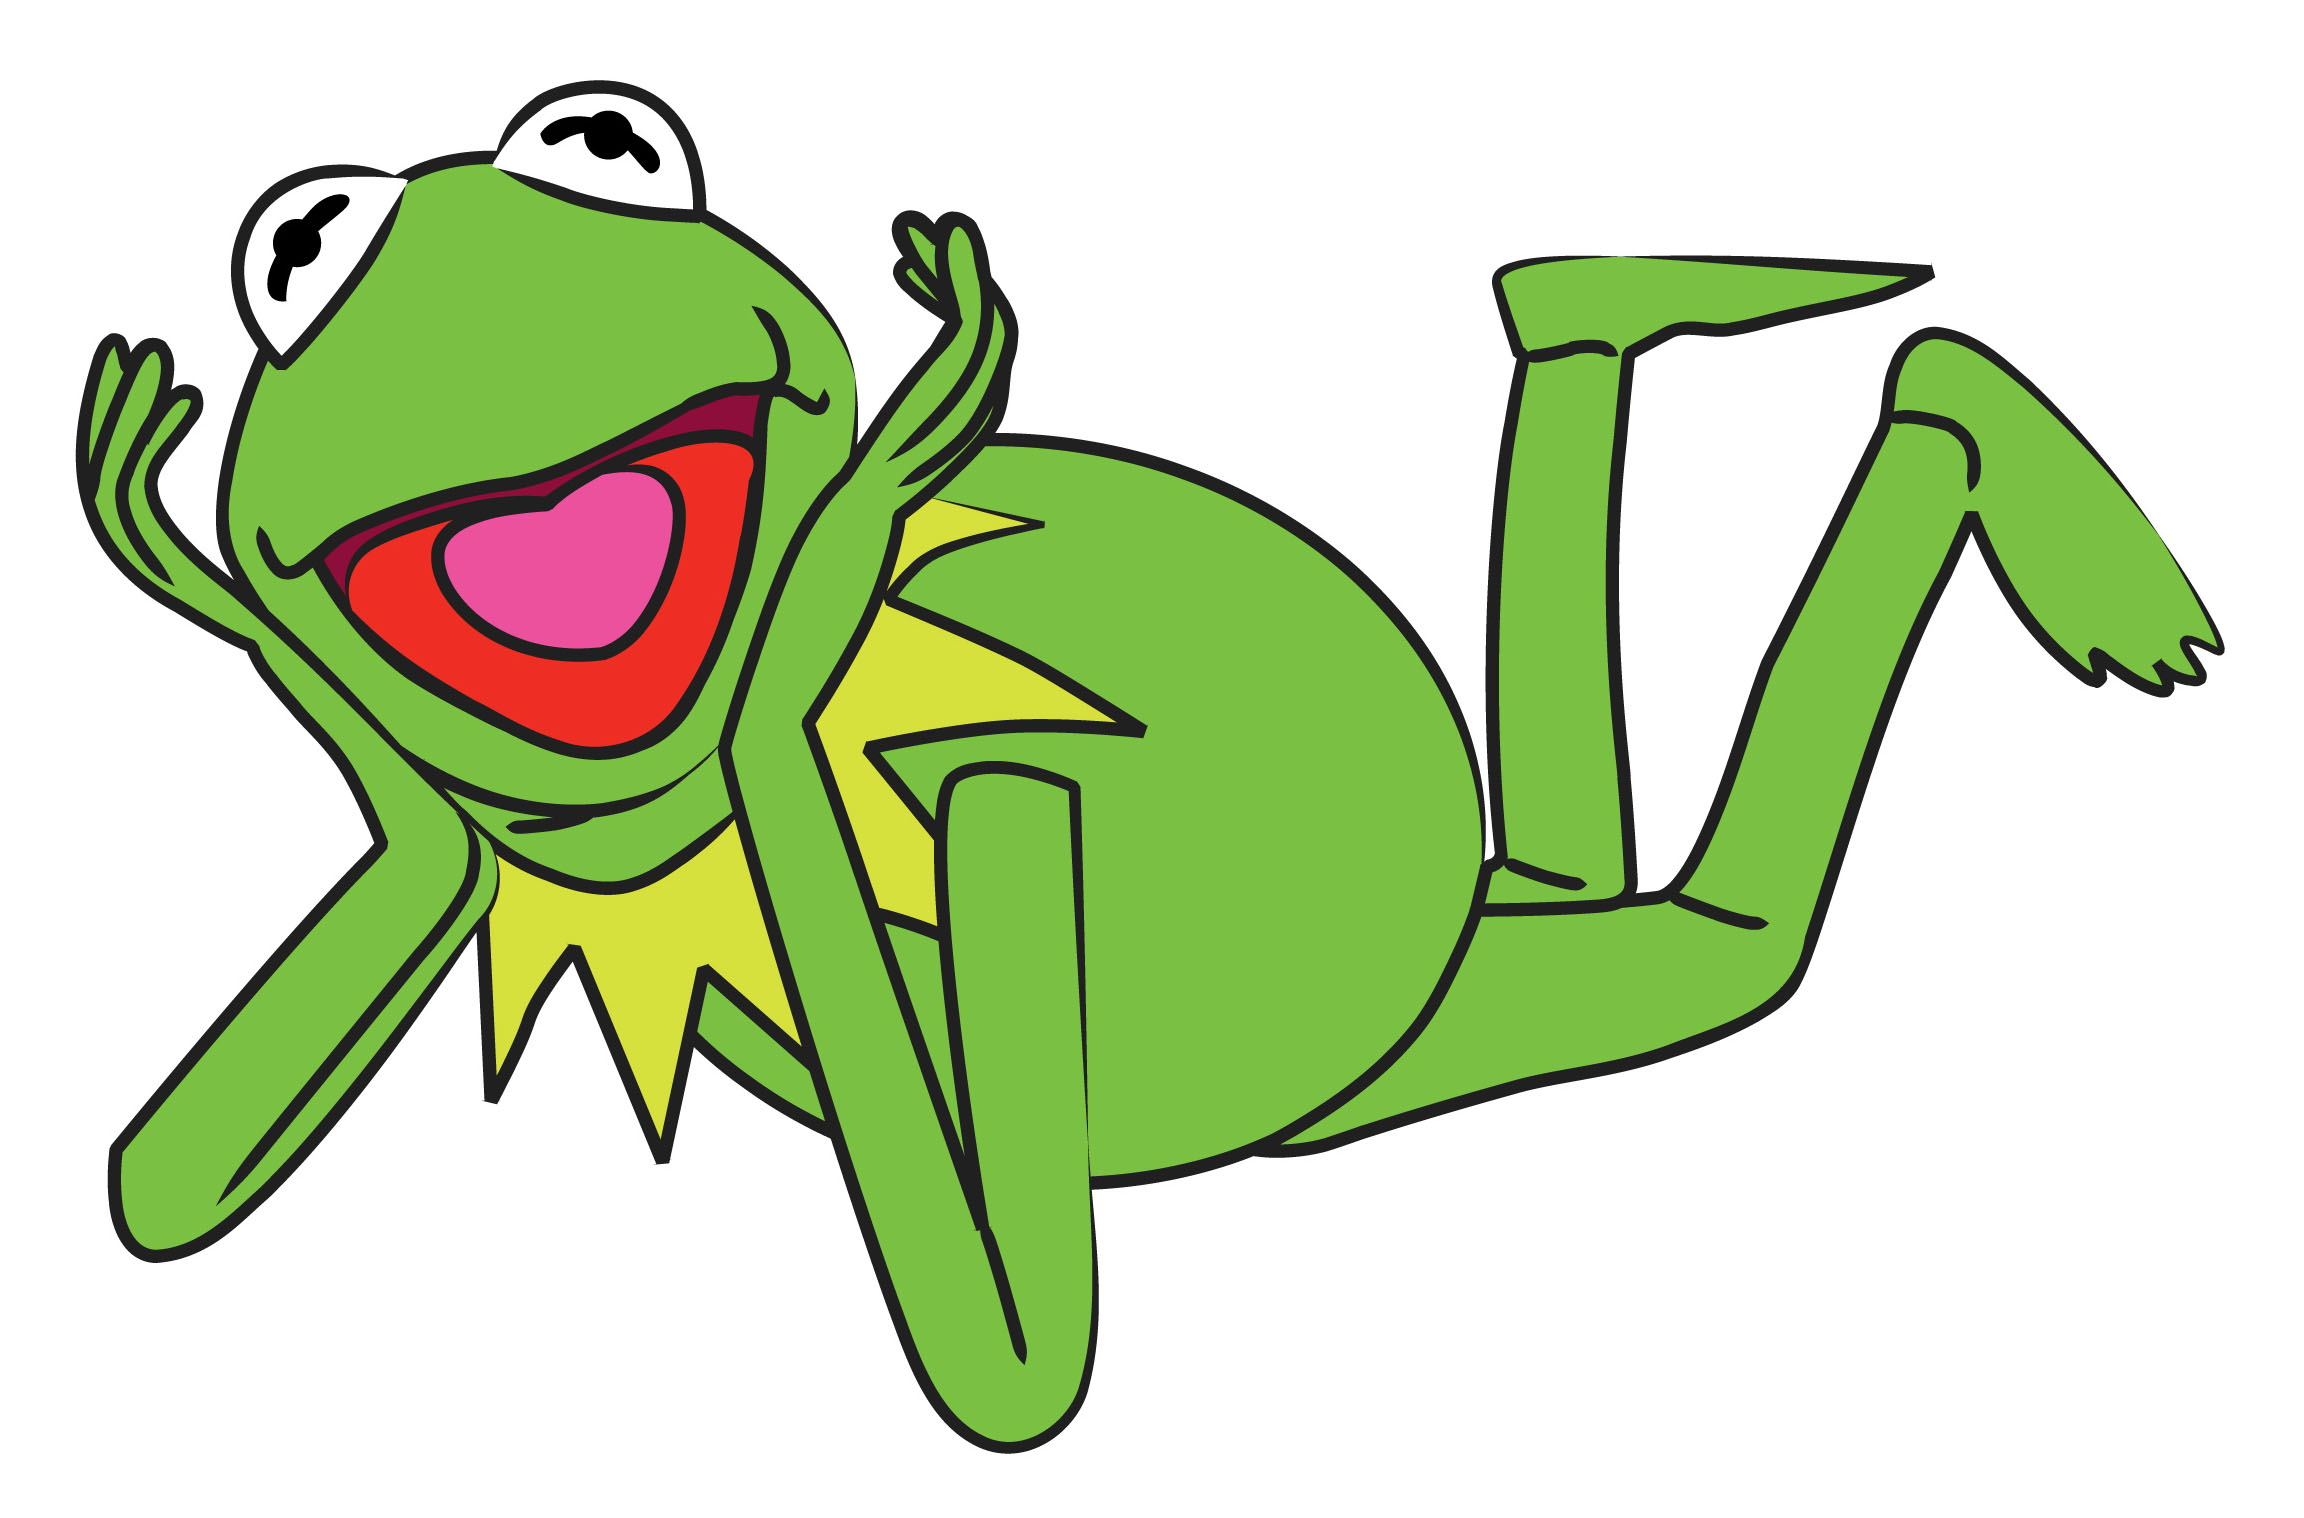 The Muppets Kermit The Frog Clip Art The Muppets Kermit - Kermit The Frog Drawing - HD Wallpaper 